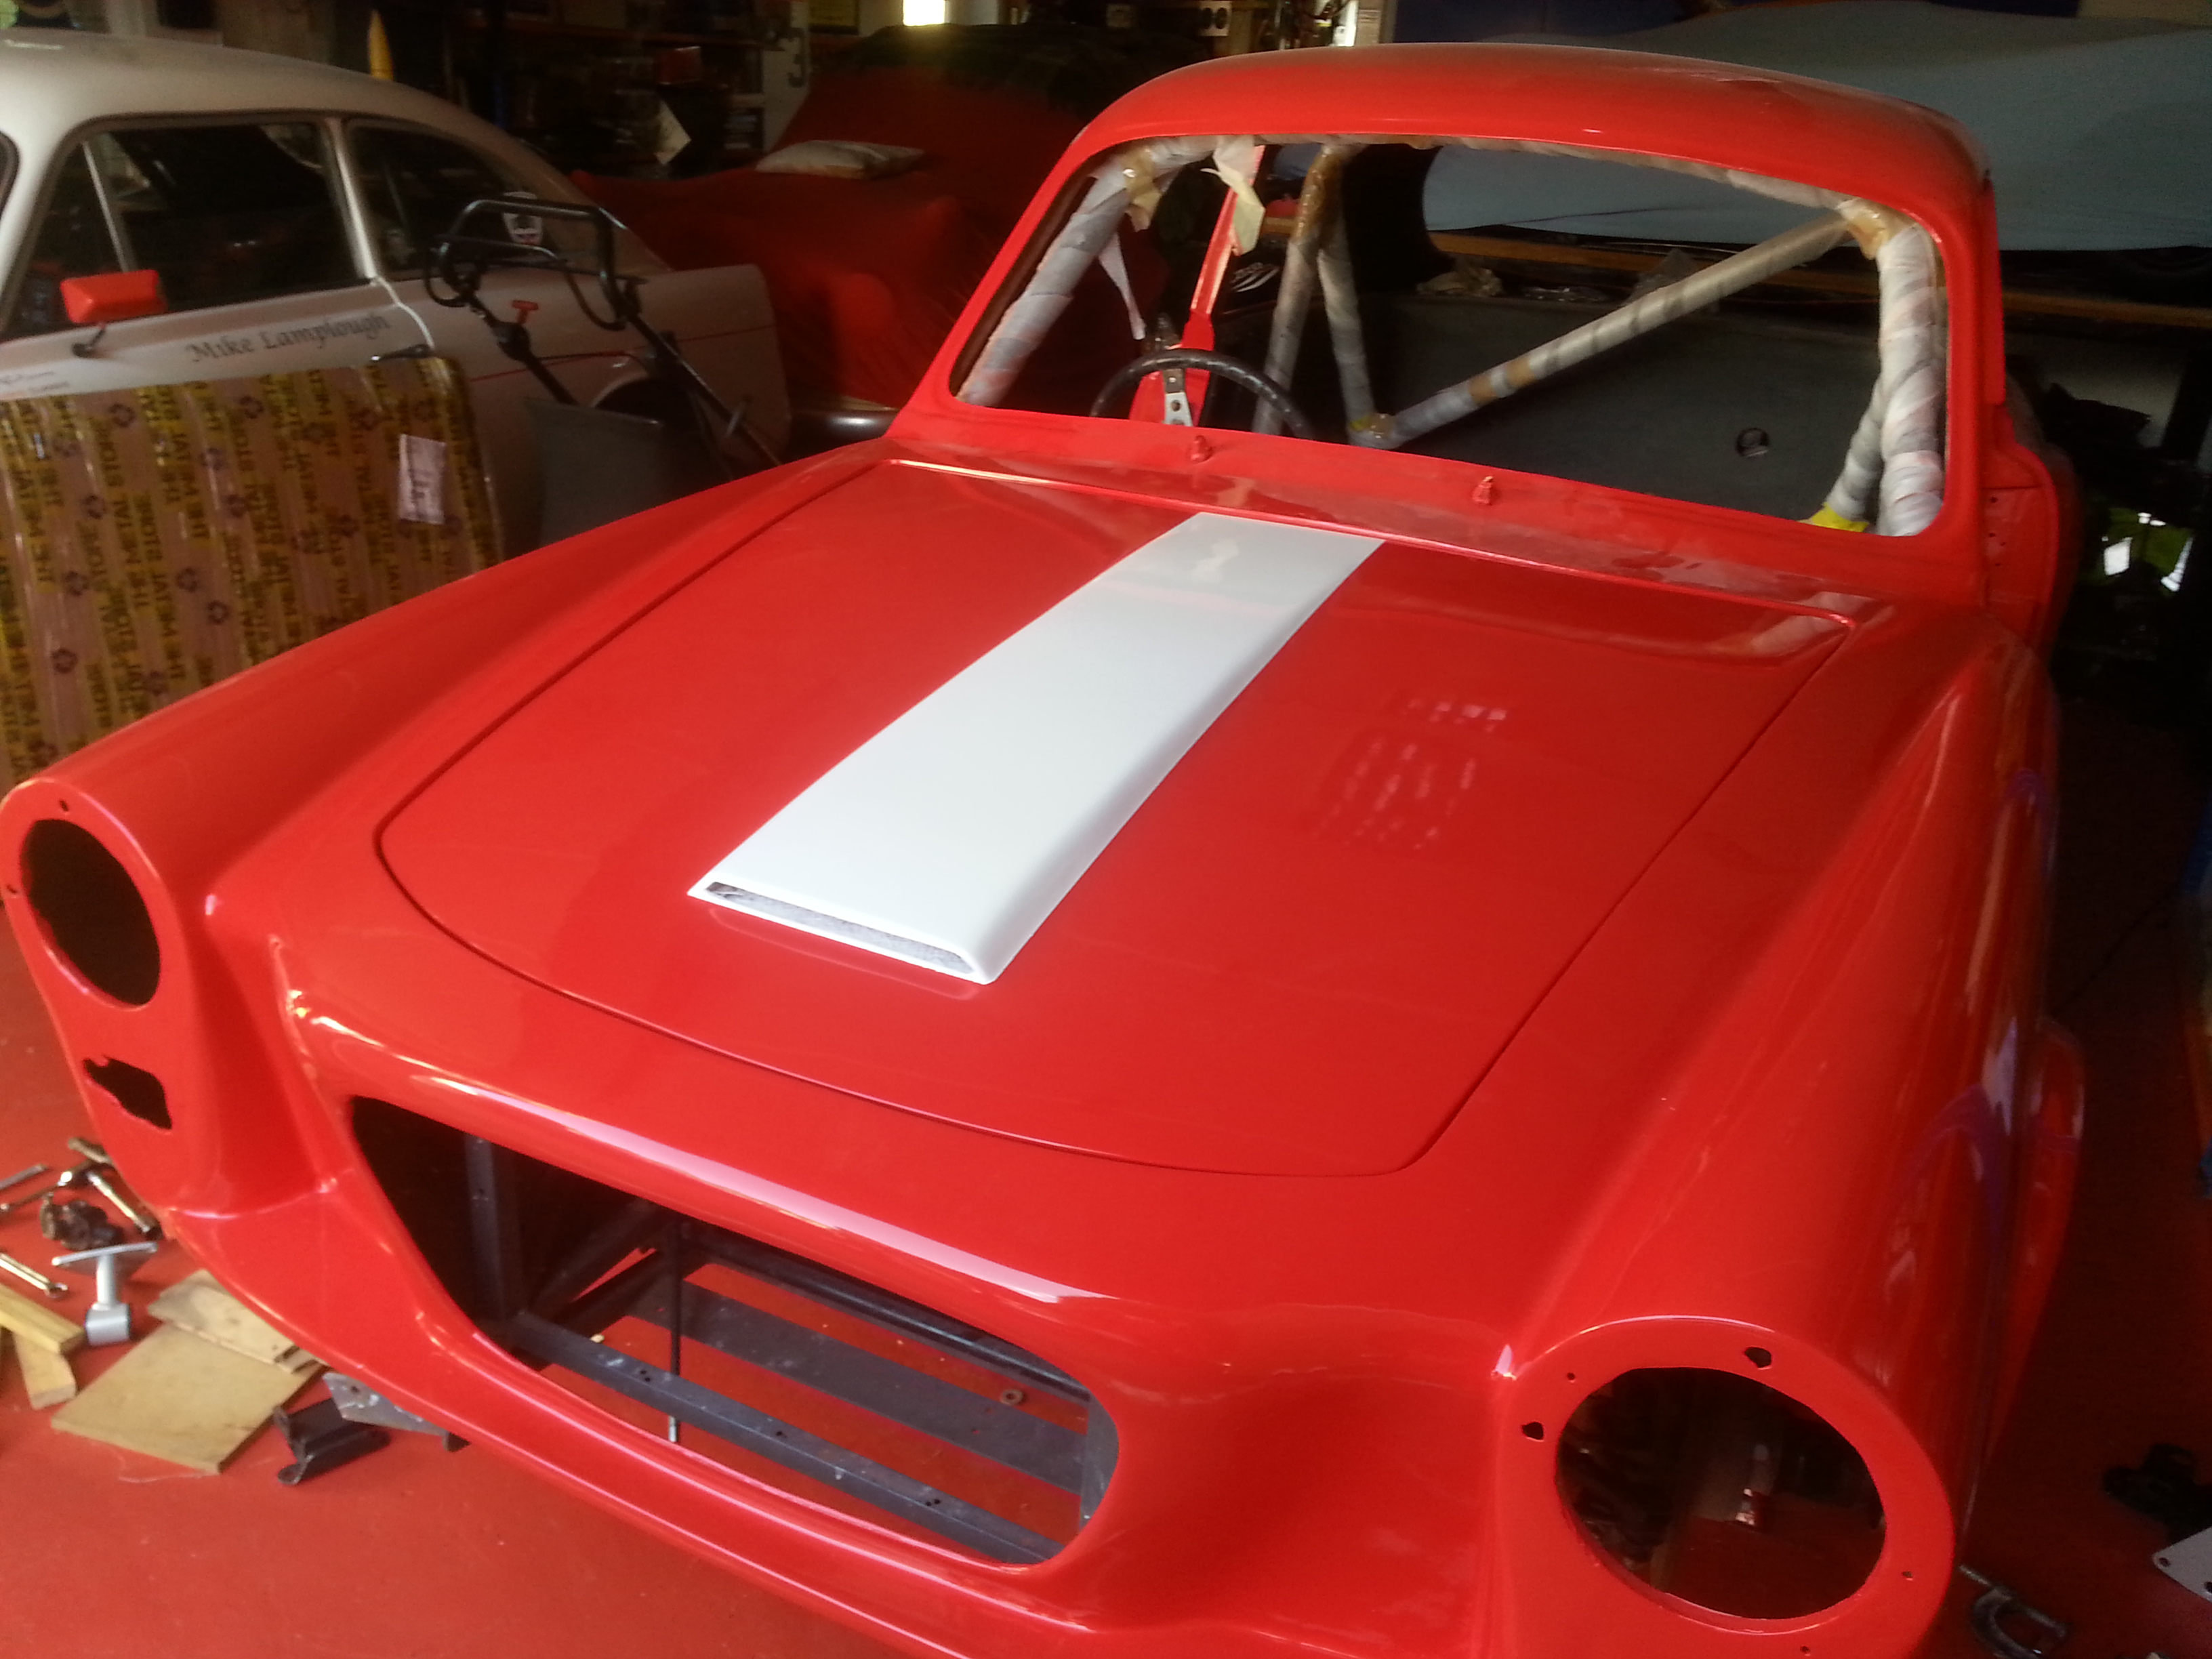 Pistonheads - The image shows a classic red race car that appears to be under restoration or renovation. It's situated indoors, likely within a garage or workshop space. The car features a prominent white stripe along its side, which is often associated with racing cars. The bodywork of the car looks freshly painted and possibly modified, as indicated by the missing hood and the open front panel that reveals engine components. There are also some tools visible in the background, suggesting a work-in-progress environment.